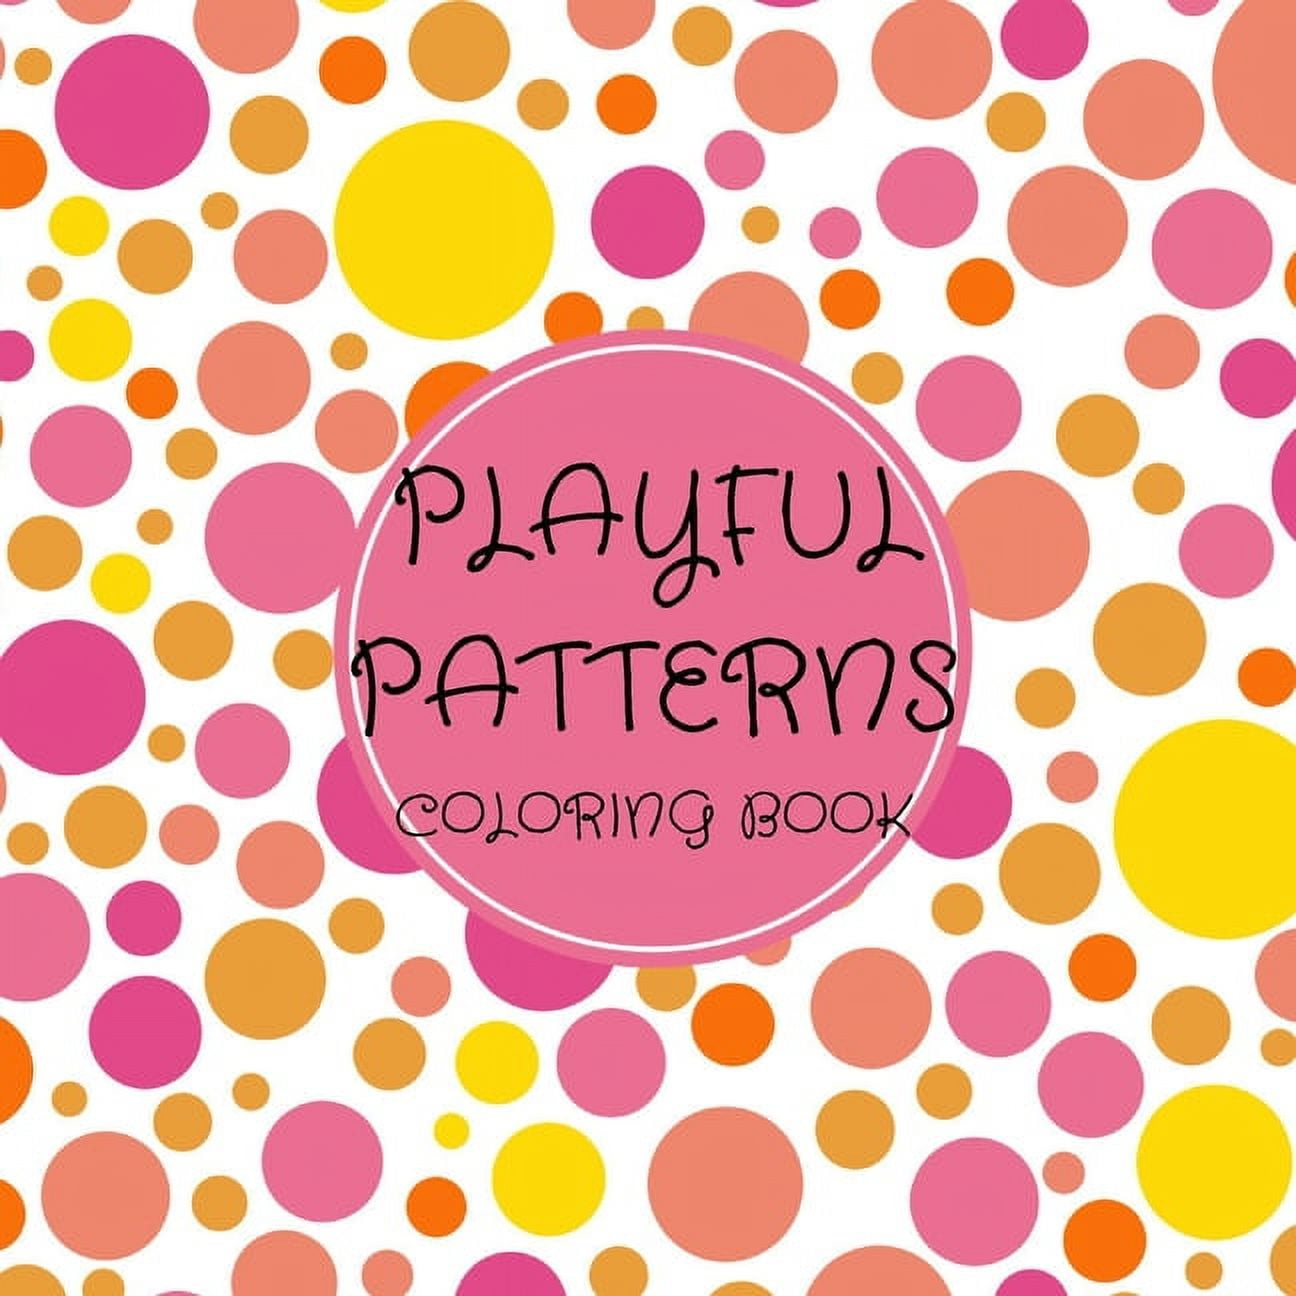 Playful Patterns Coloring Book: For Kids Ages 6-8, 9-12, Girls Creative  Coloring Book for Tweens, 50 Cute Designs